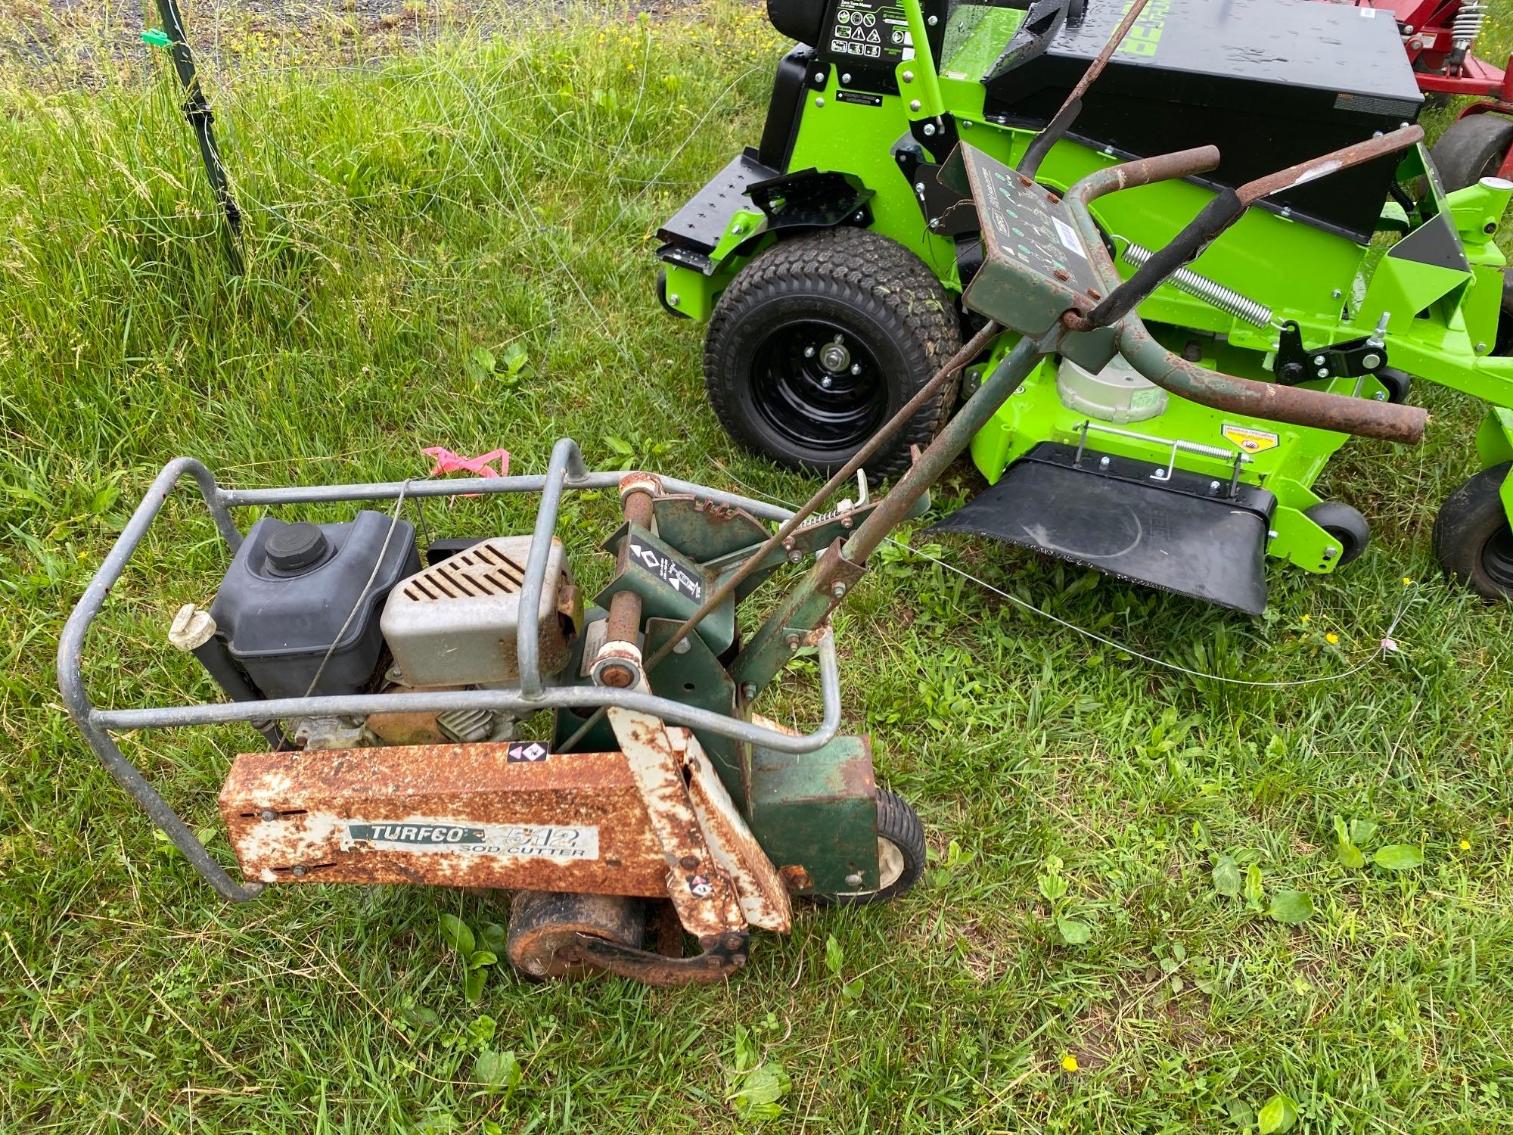 Image for Turfco Sod Cutter - Unknown Condition 